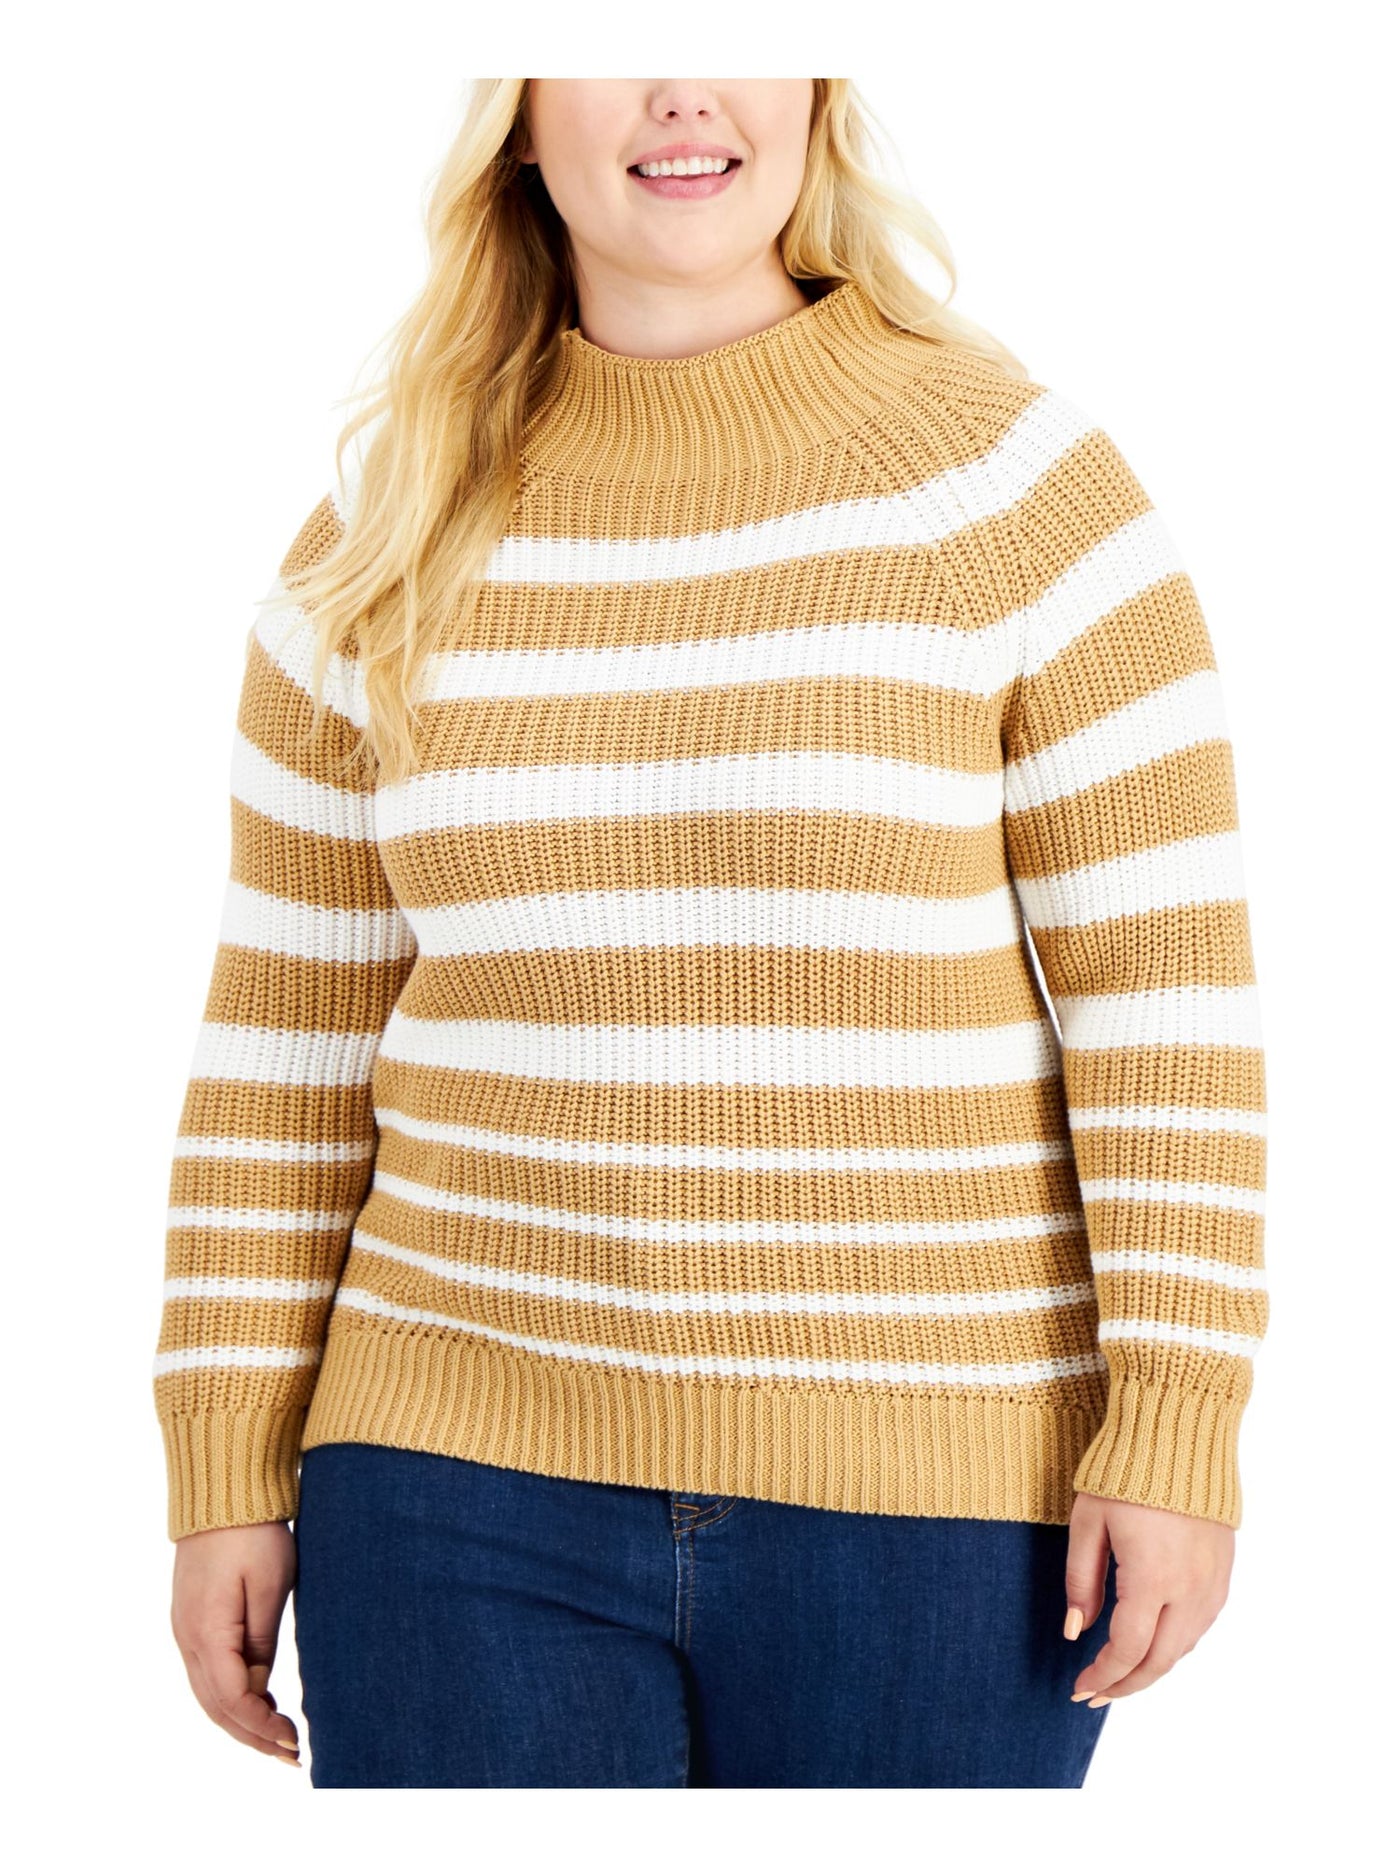 STYLE & COMPANY Womens Beige Cotton Textured Funnel Neck Striped Long Sleeve Sweater Plus 3X